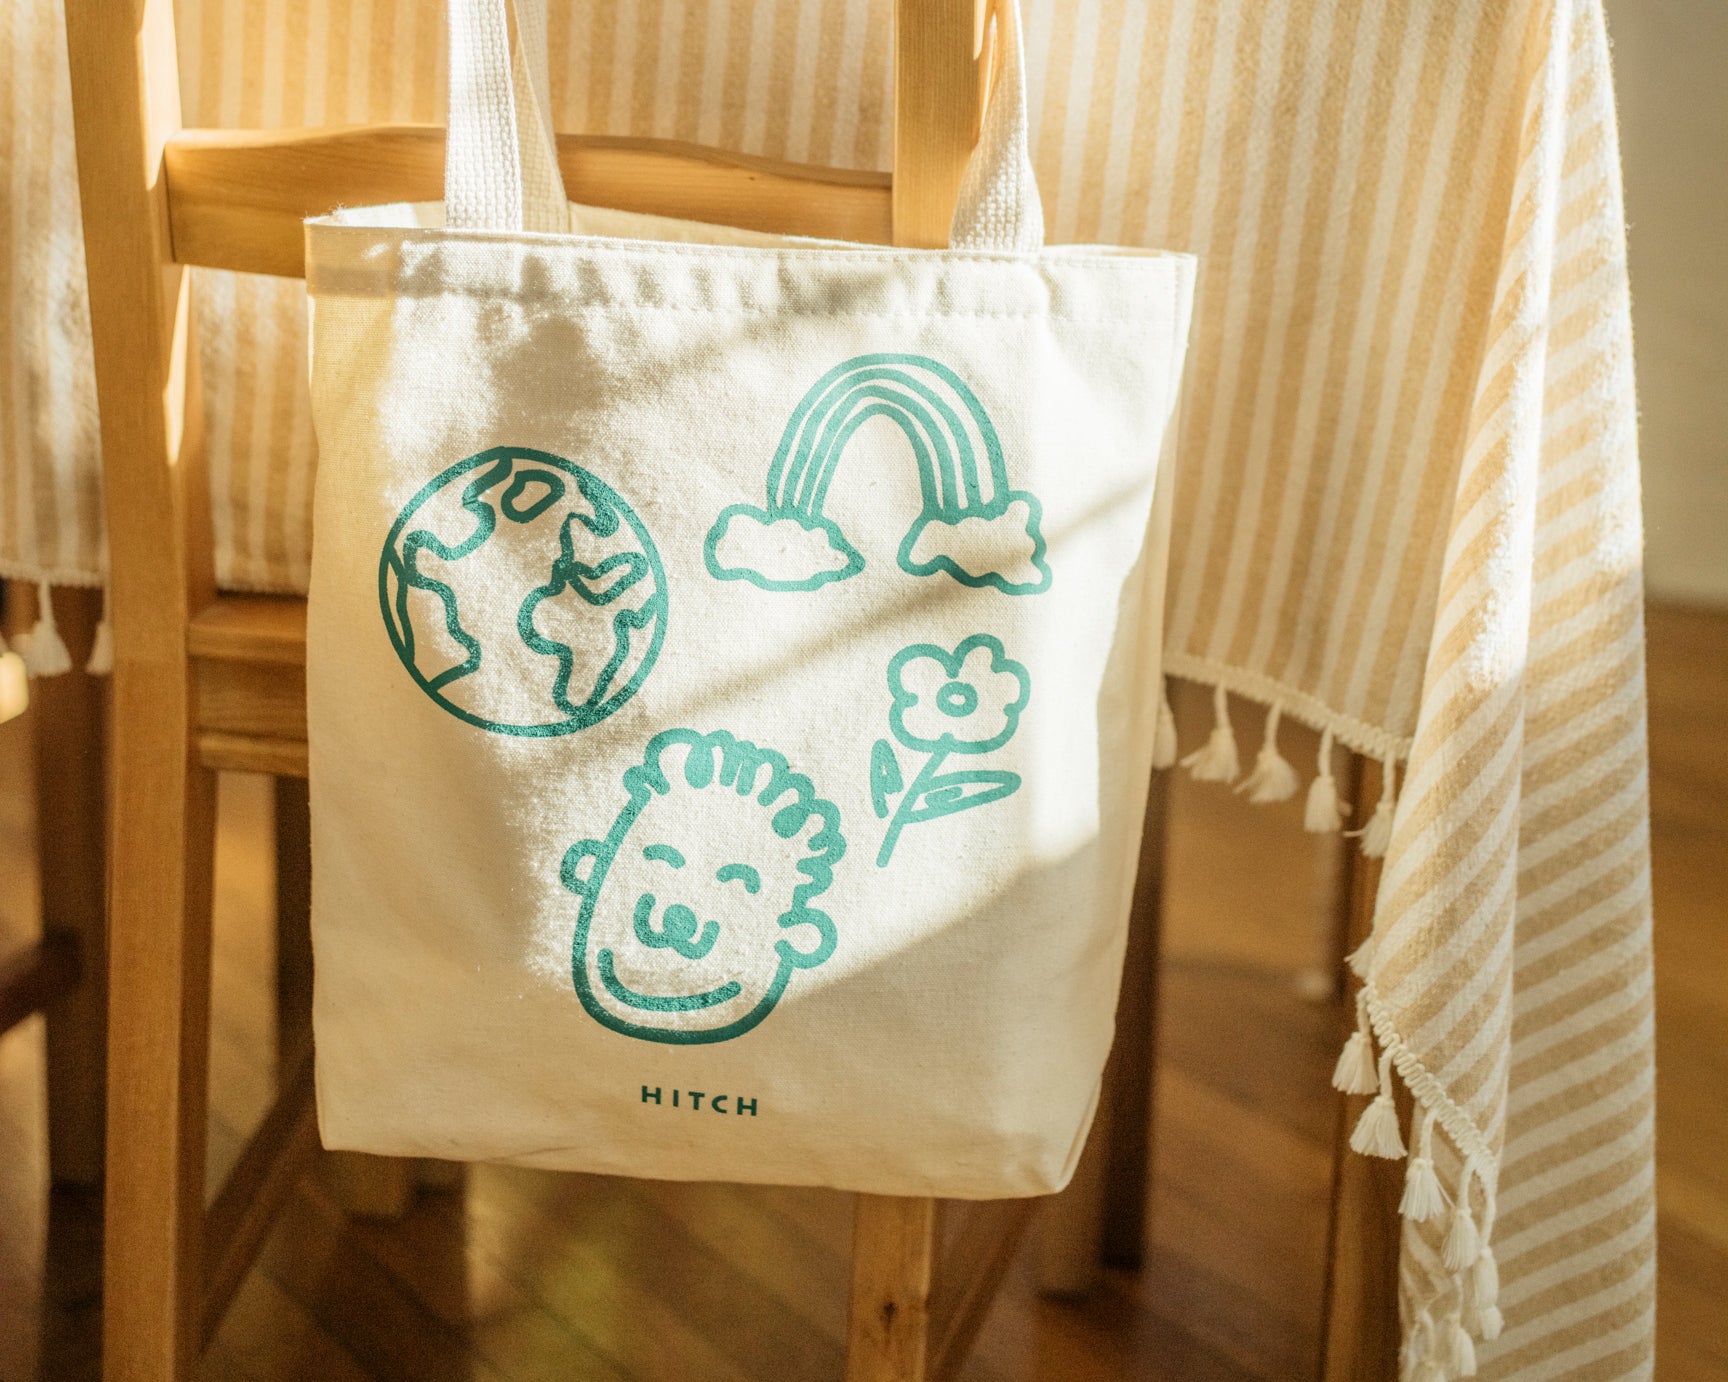 Hitch Climate Tote hanging on the back of a wooden chair